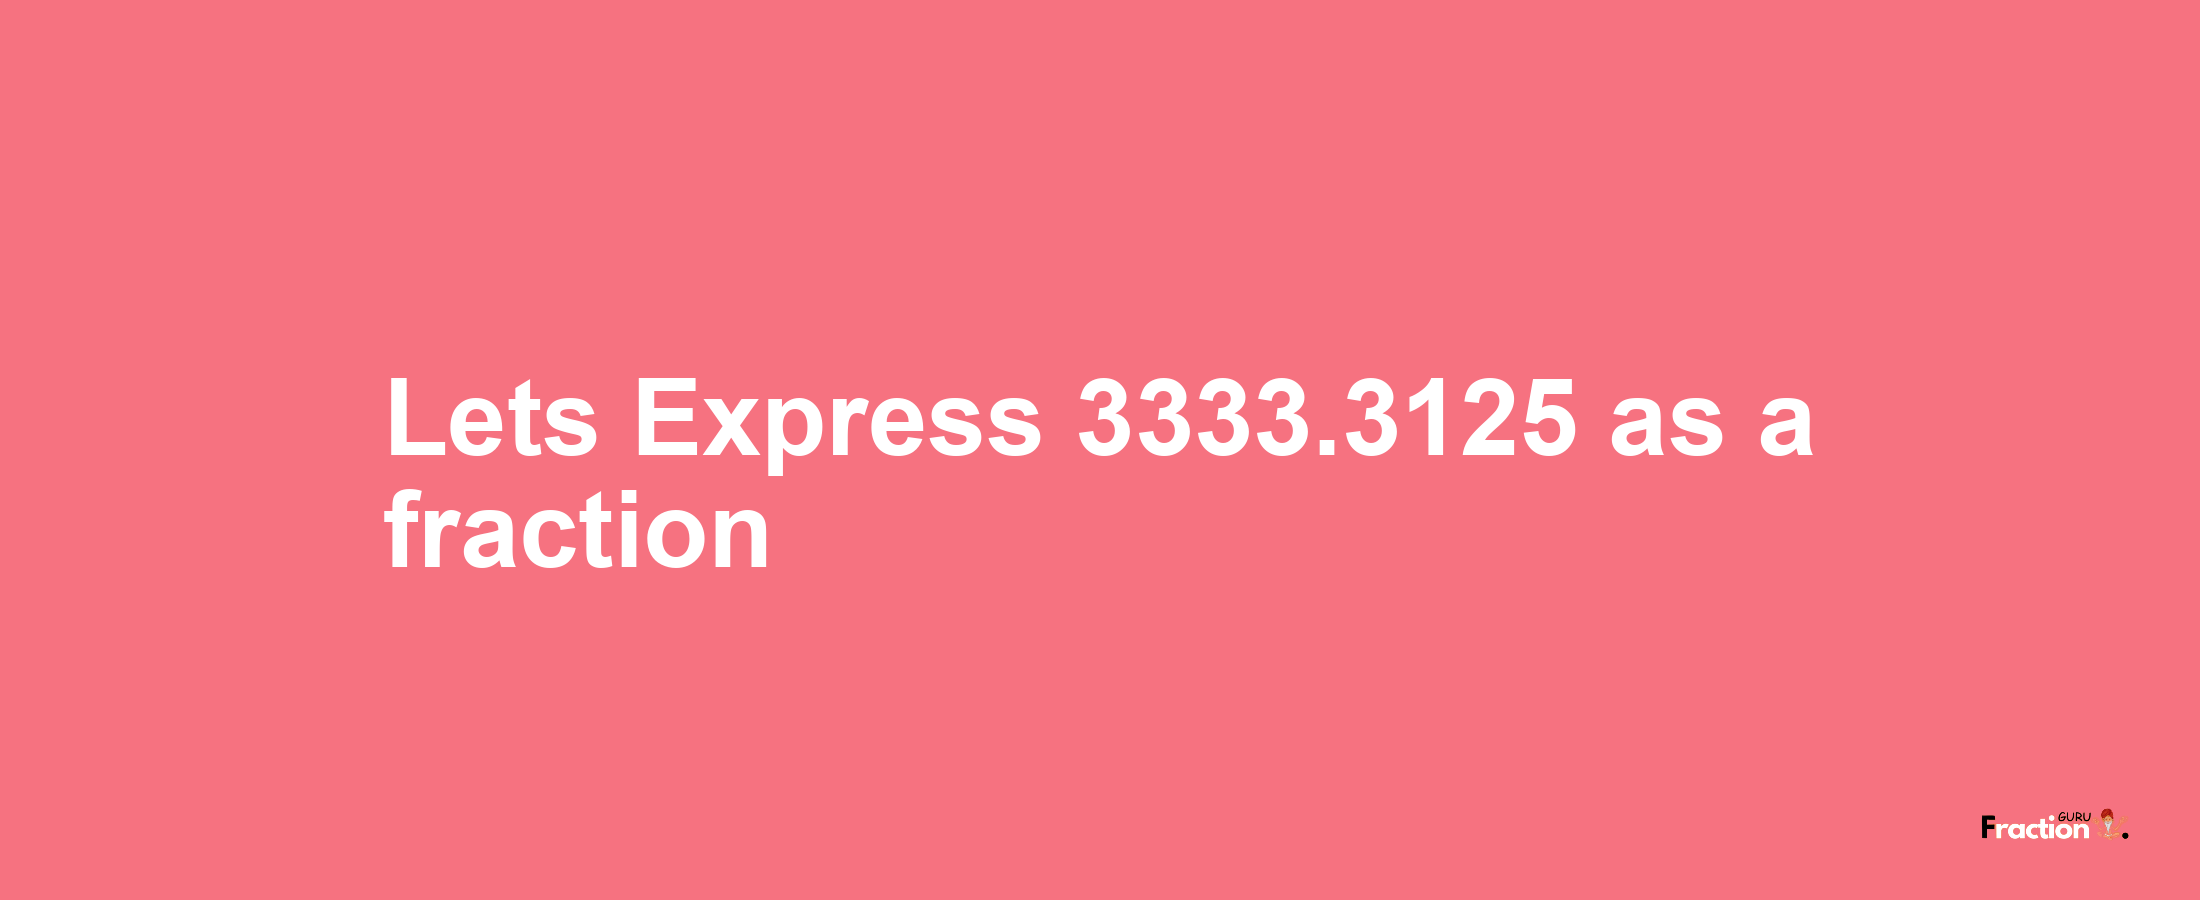 Lets Express 3333.3125 as afraction